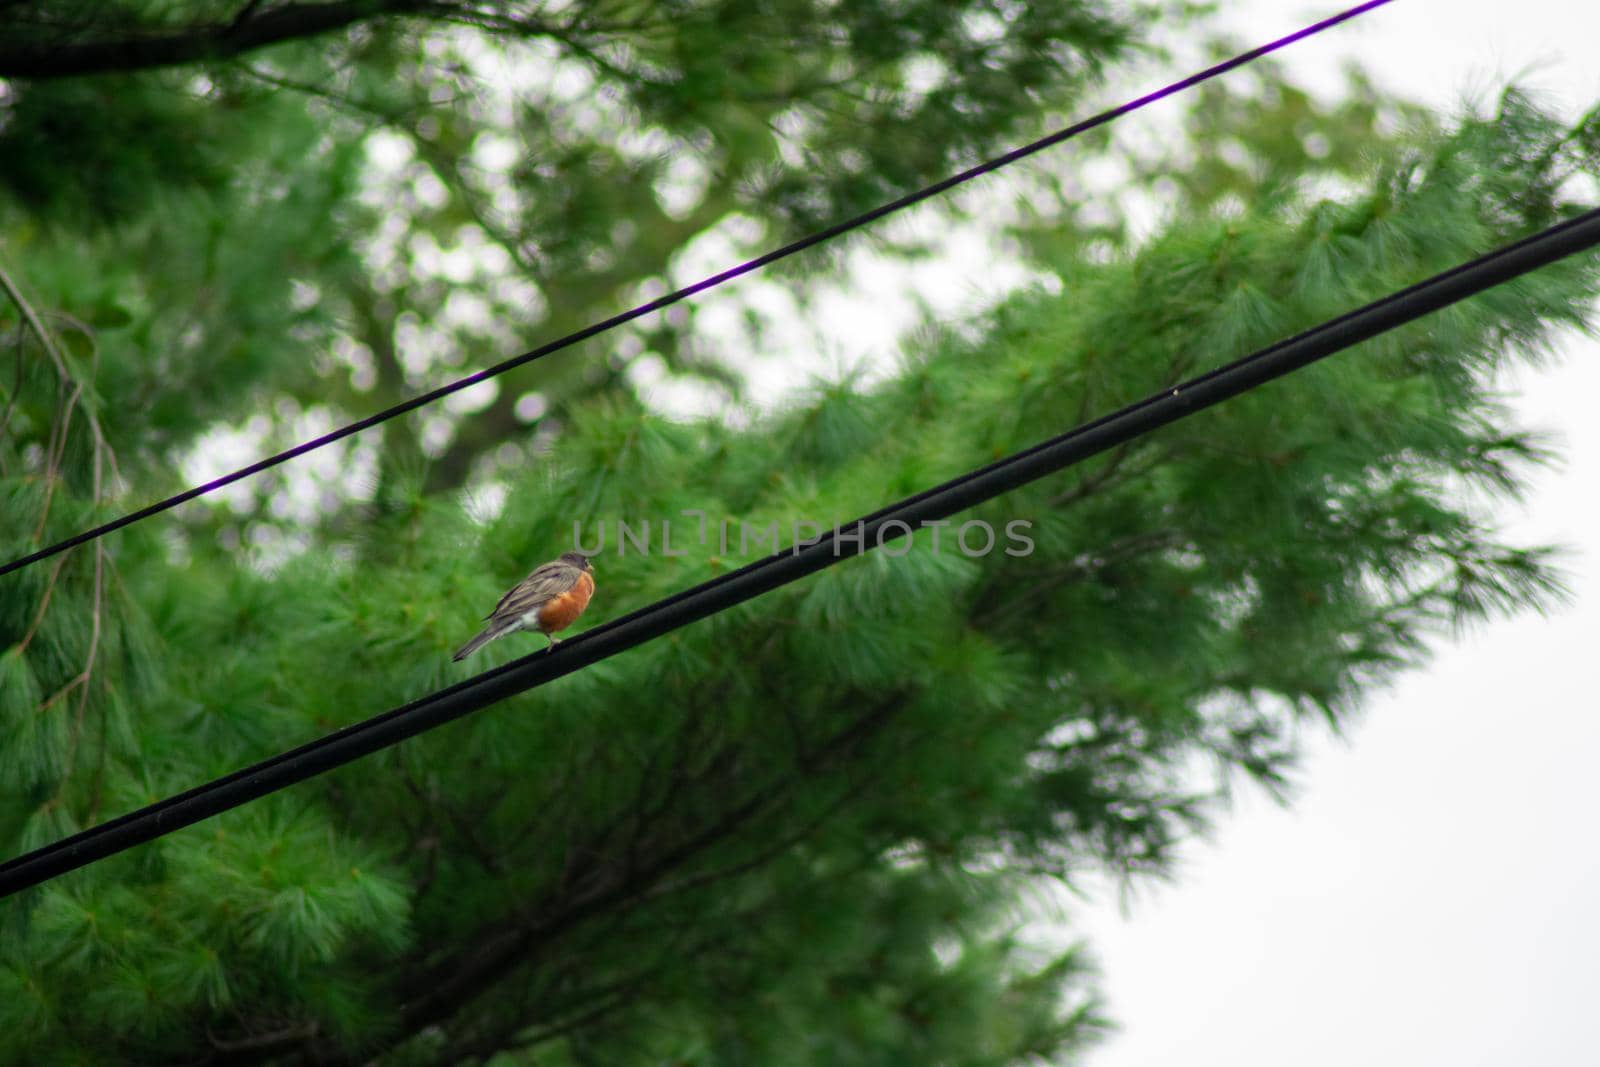 An American Robin on a Powerline With a Bright Green Tree Behind in Suburban Pennsylvania